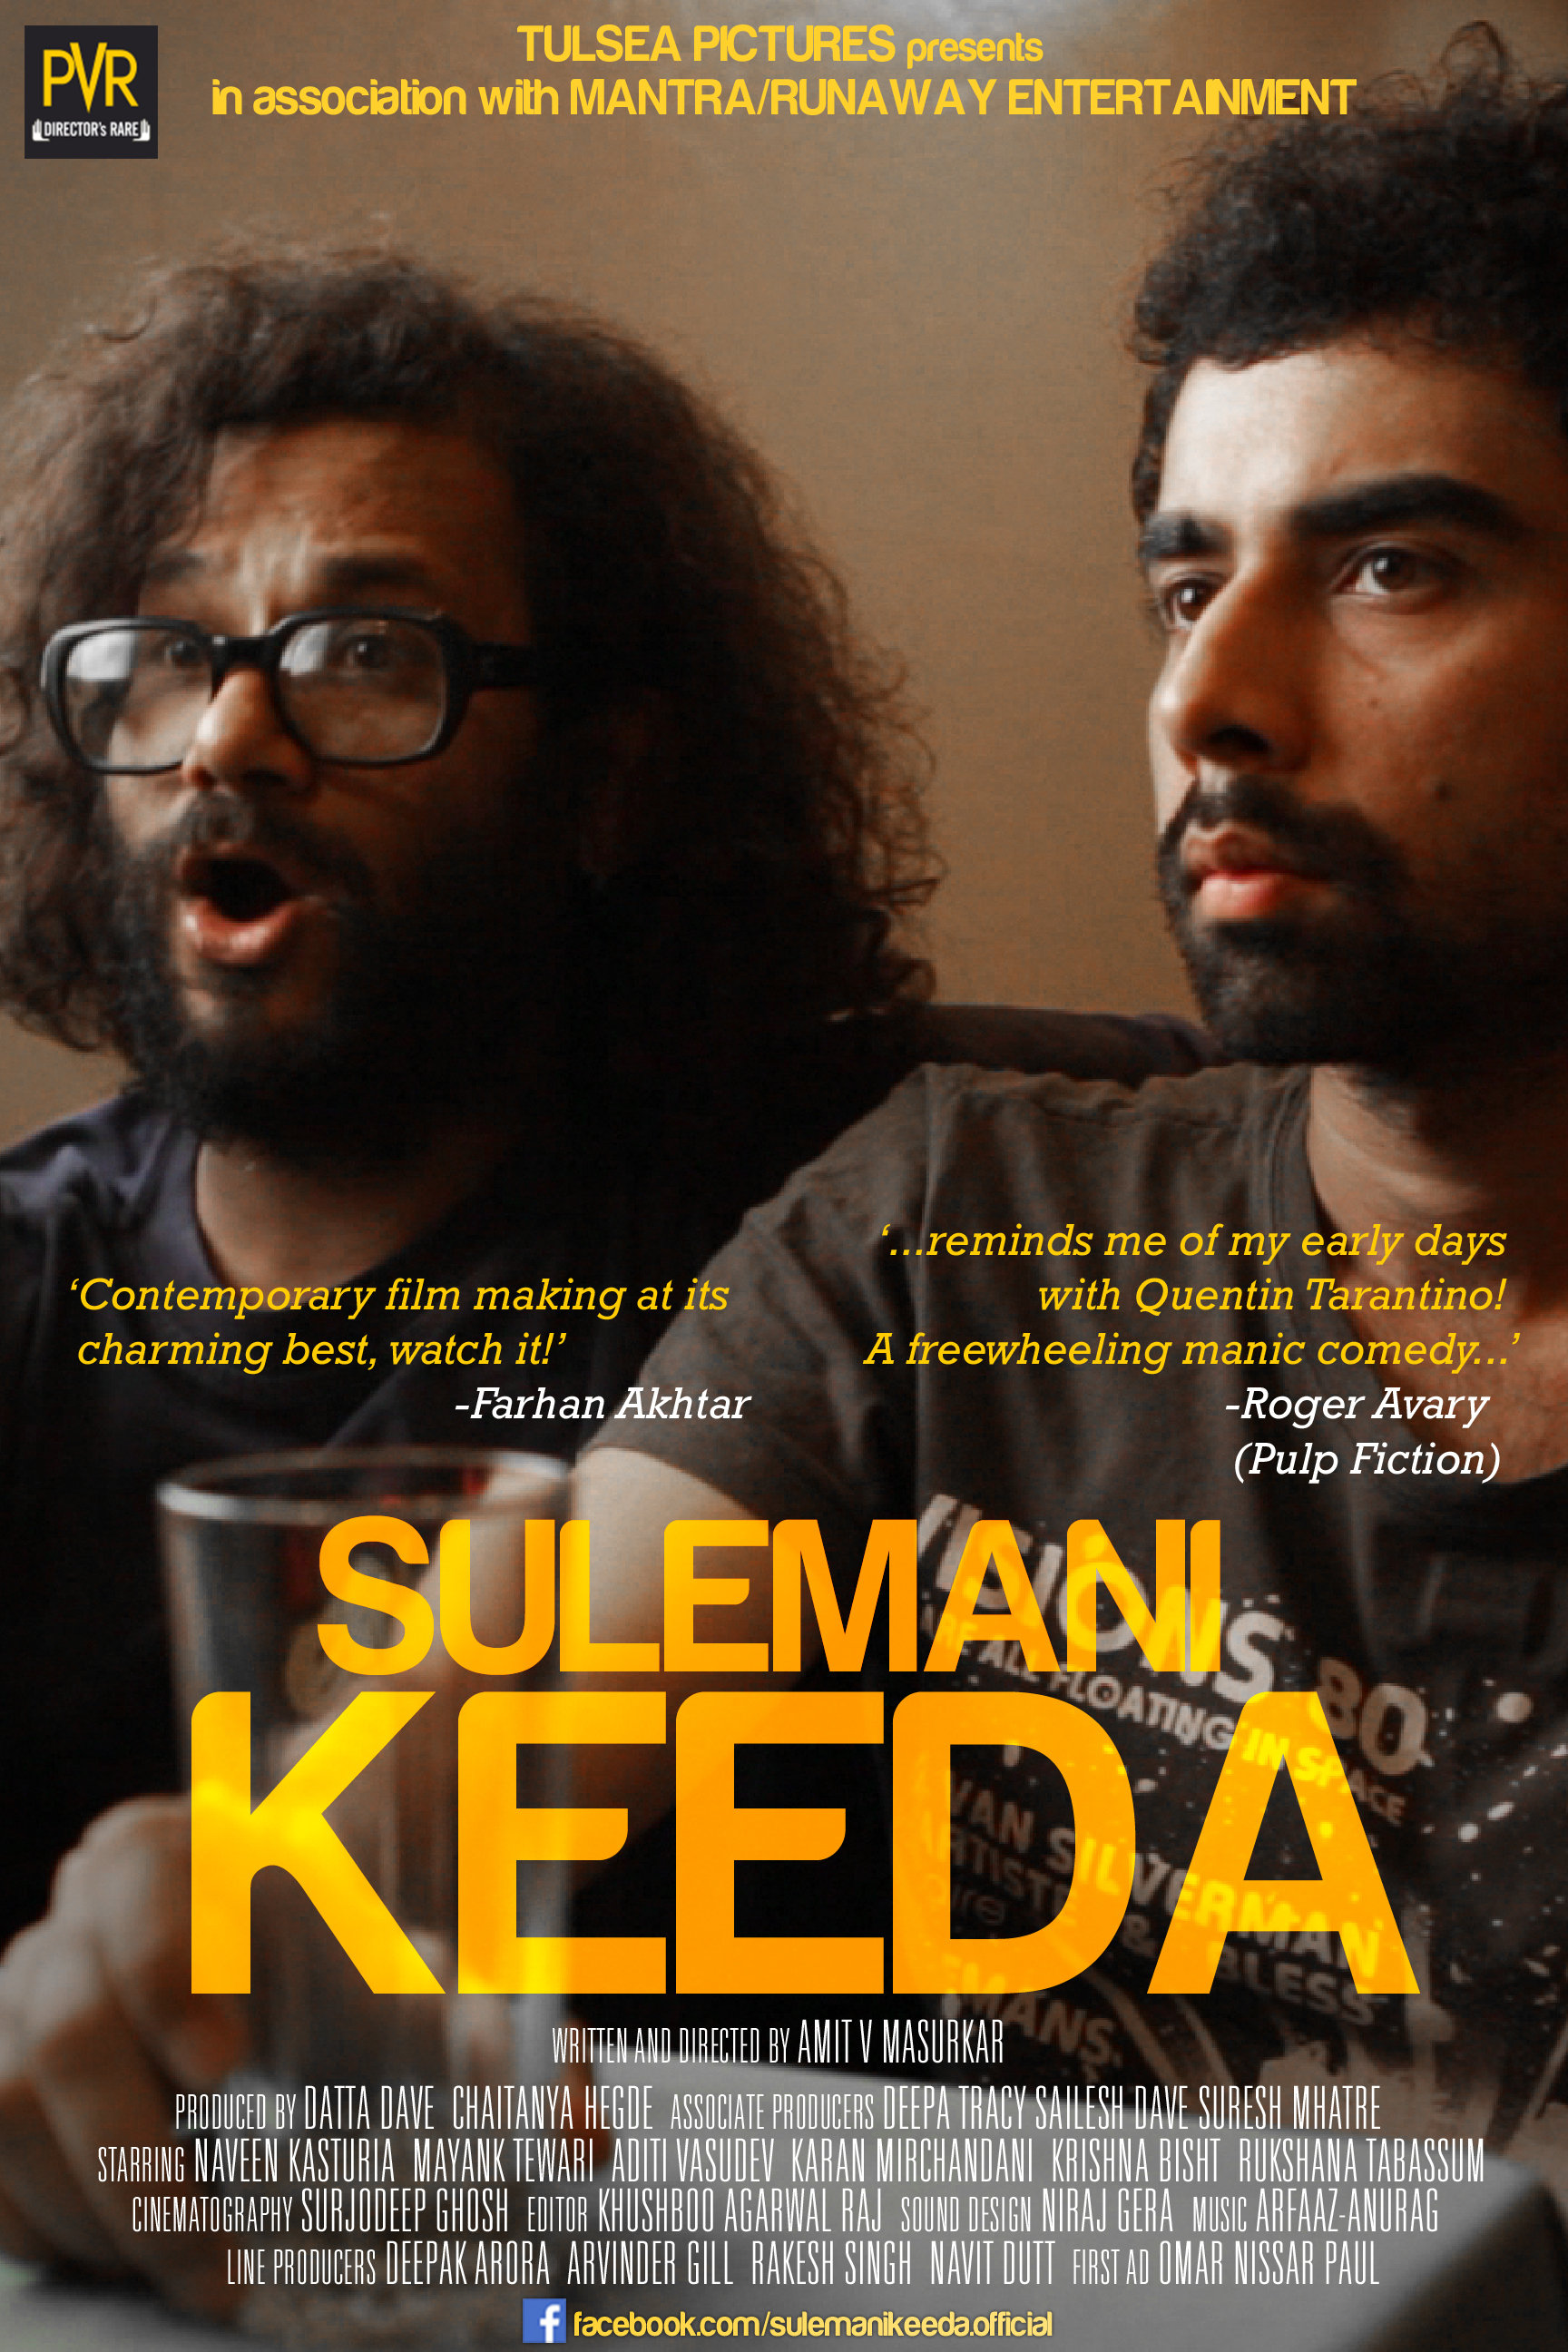 The Indian theatrical release poster of Sulemani Keeda